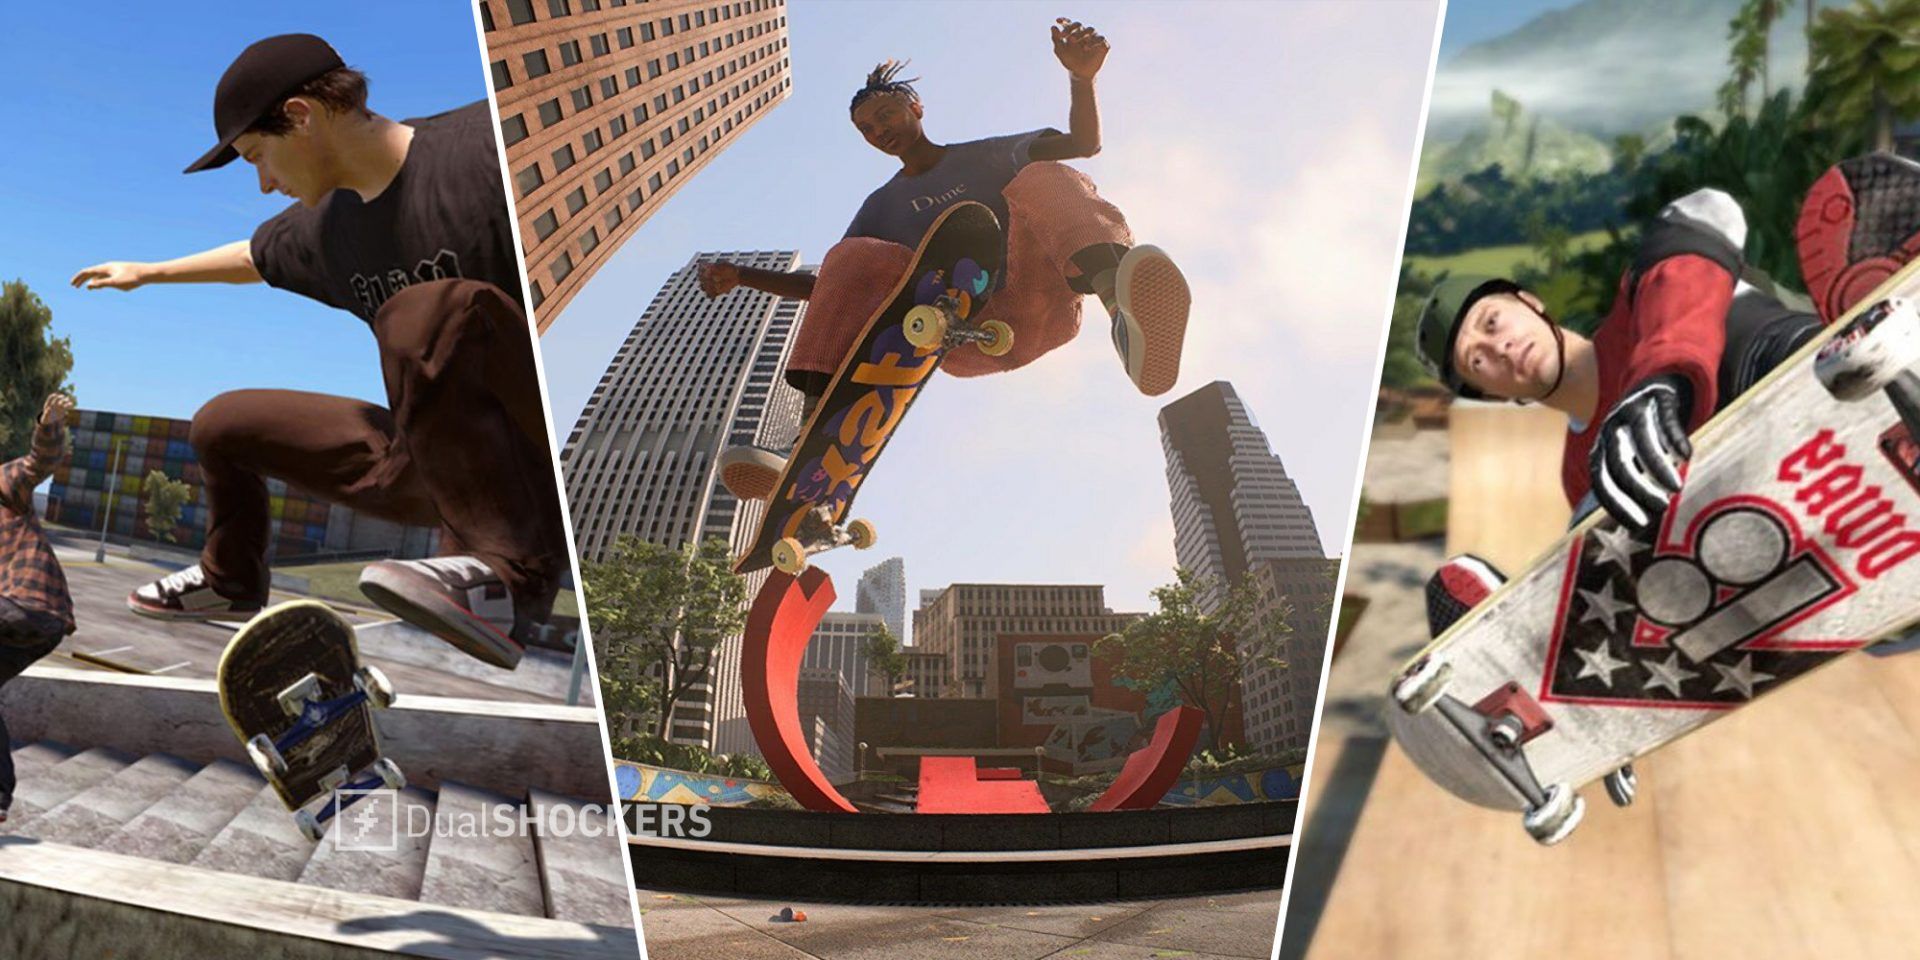 Skate 4 Beta Reportedly Features Loot Boxes